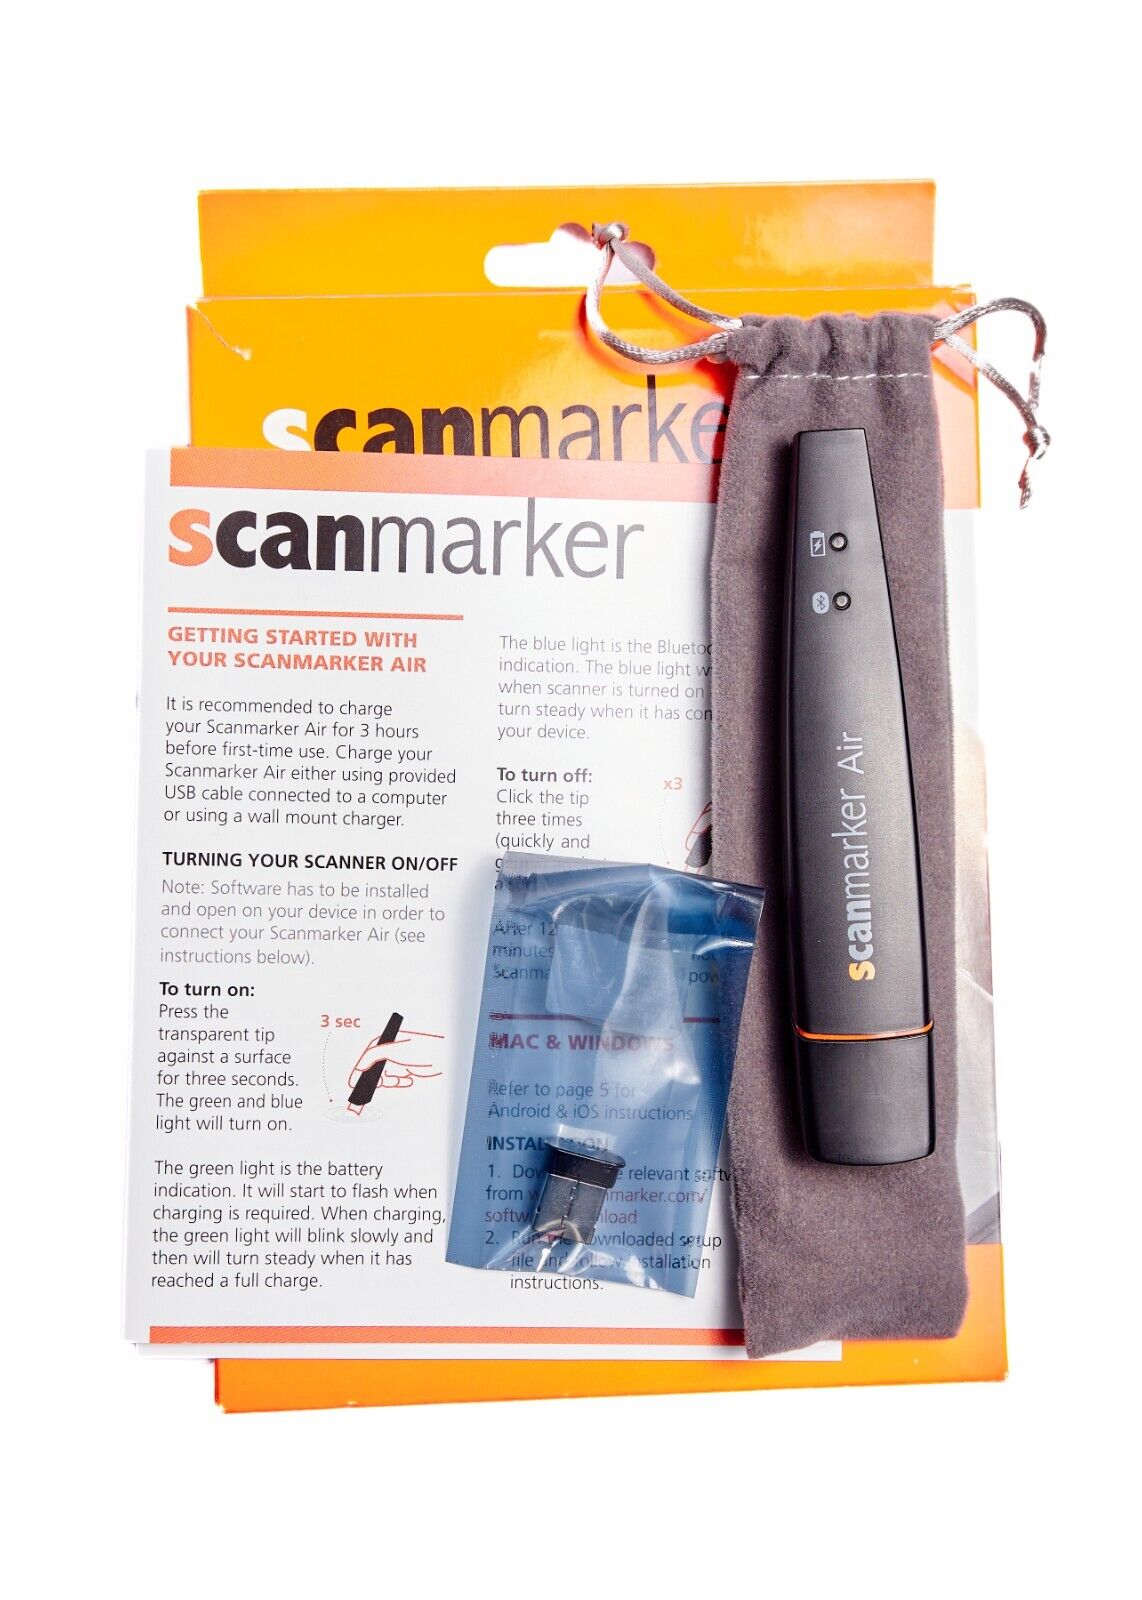 Scanmarker Air Digital Highlighter Pen Scanner and Reader USB-Free Shipping